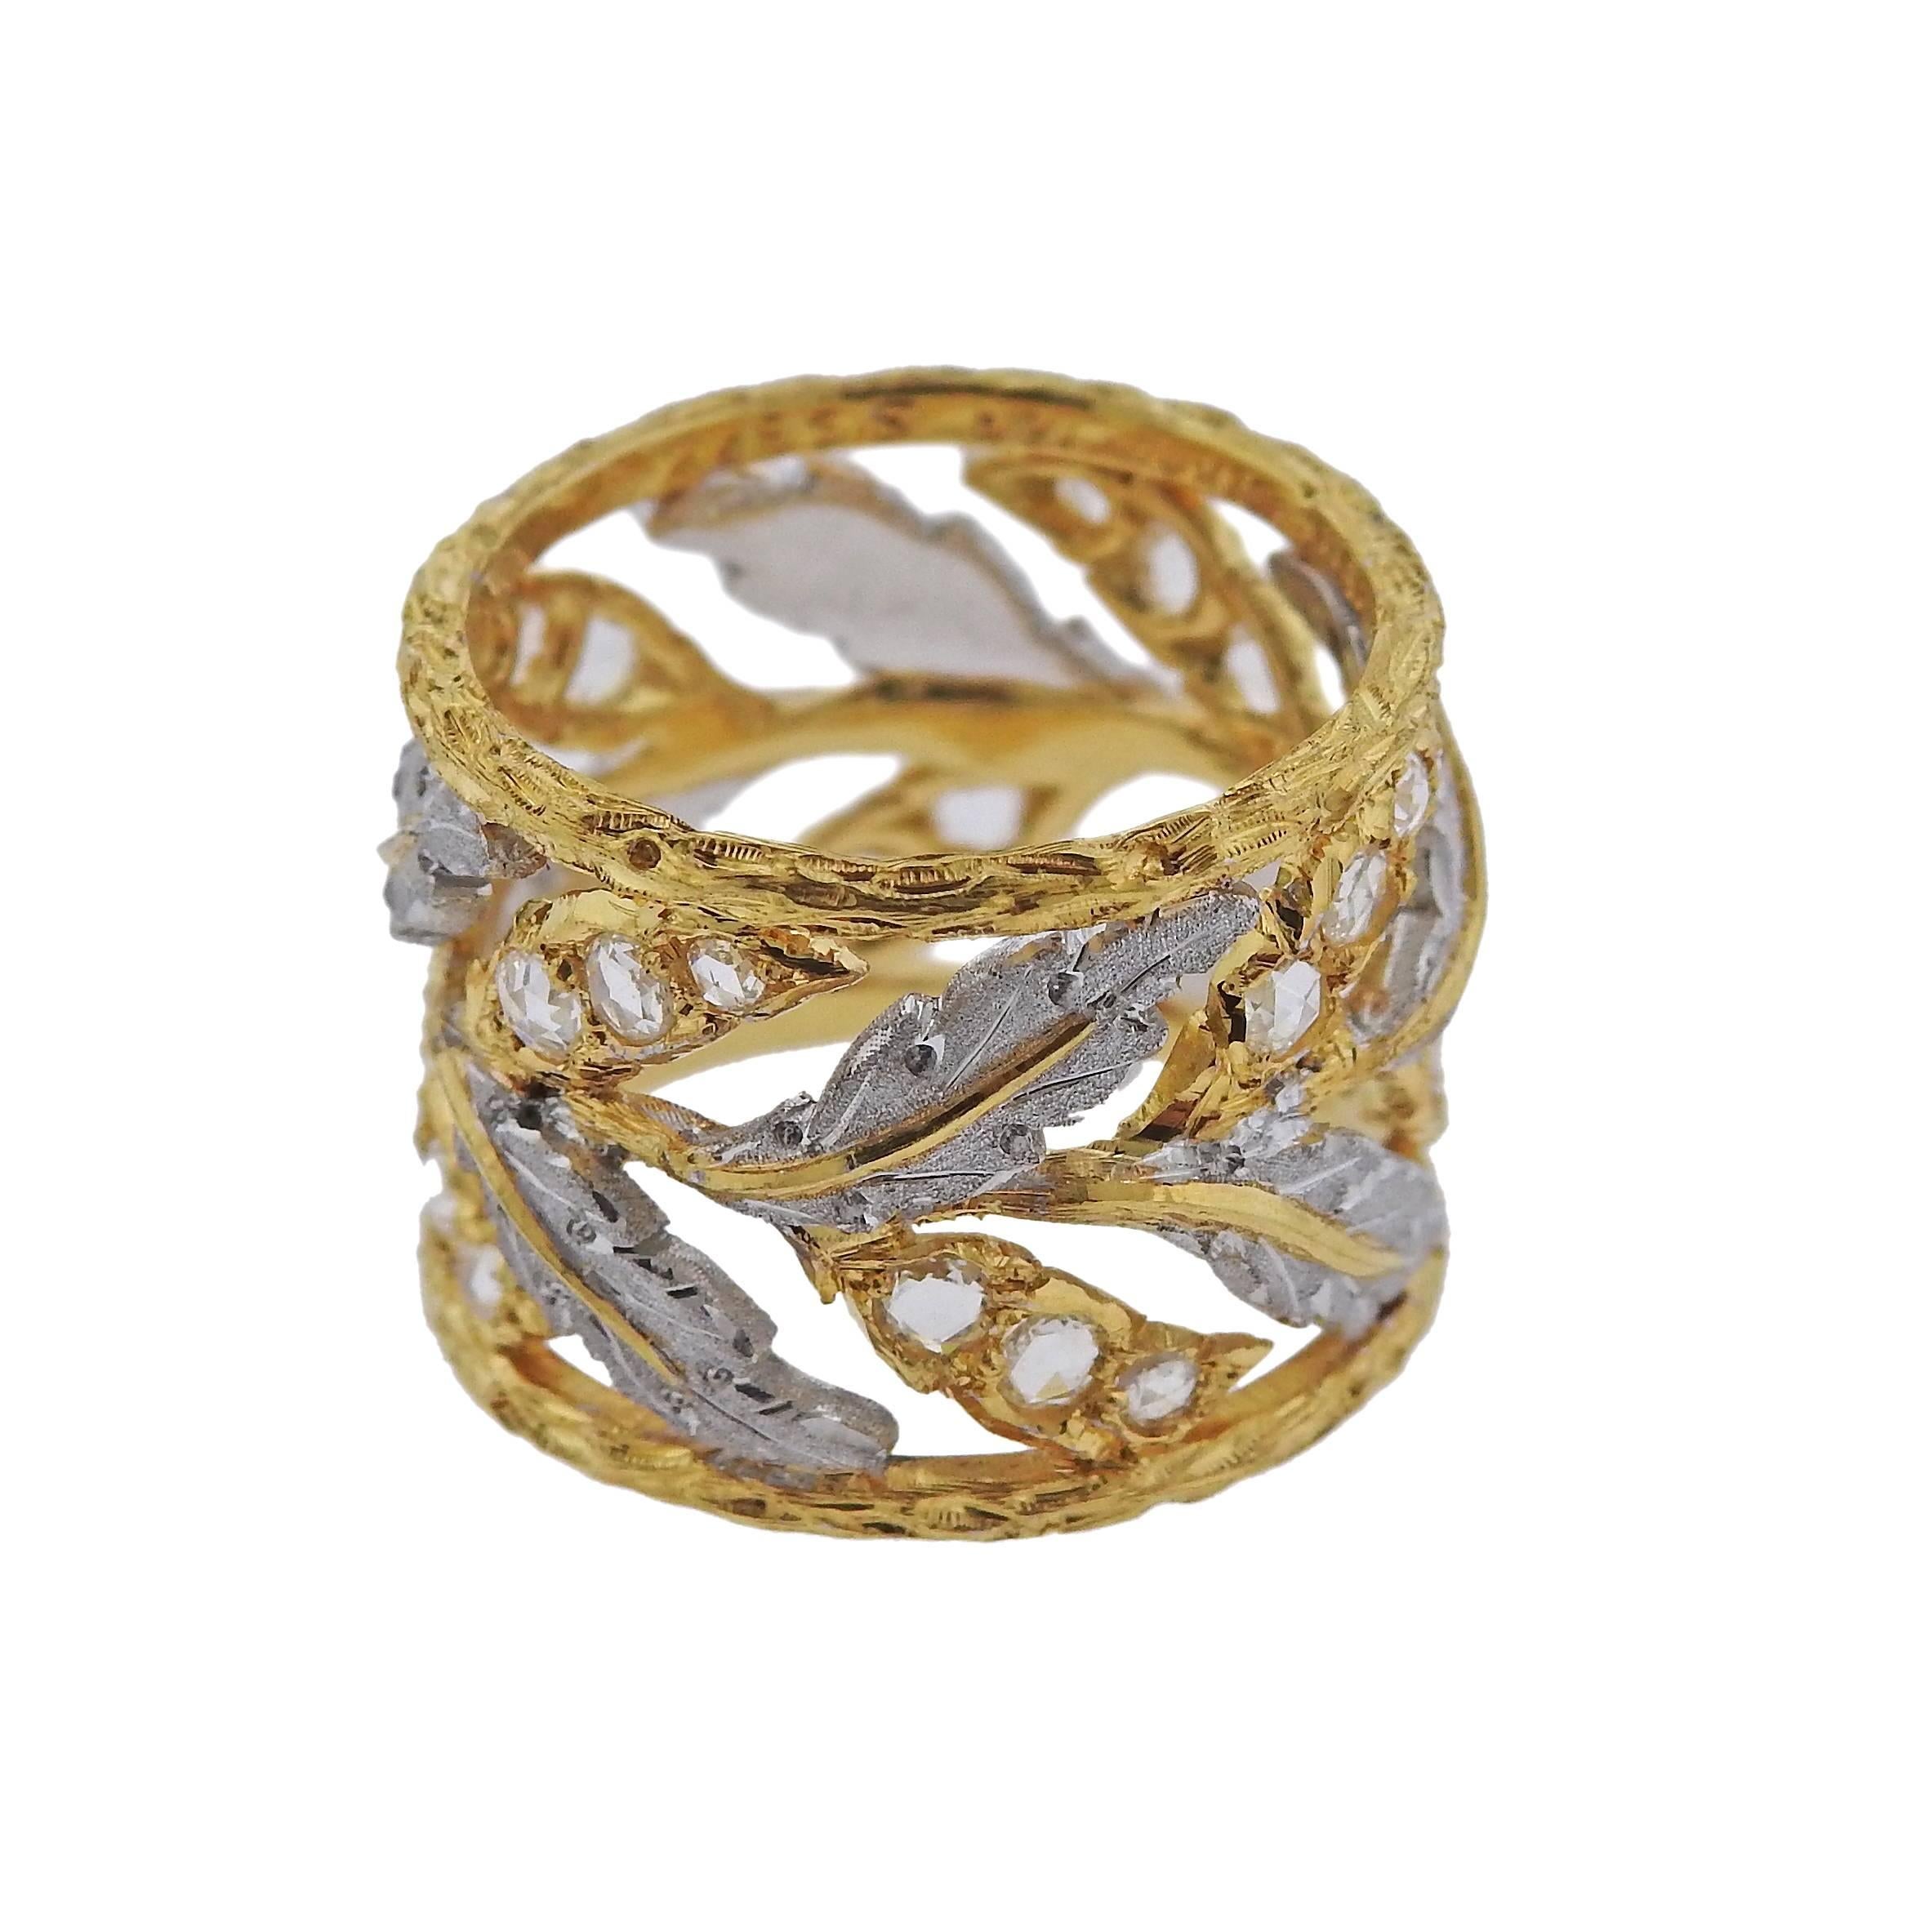 18k gold rose cut diamond wide band ring crafted by Buccellati. Ring is a size 6 and measures 14.5mm wide. Marked S5572, 18k, Buccellati , Italy. Weight is 9.7 grams. Retail is $16900, comes with paperwork.